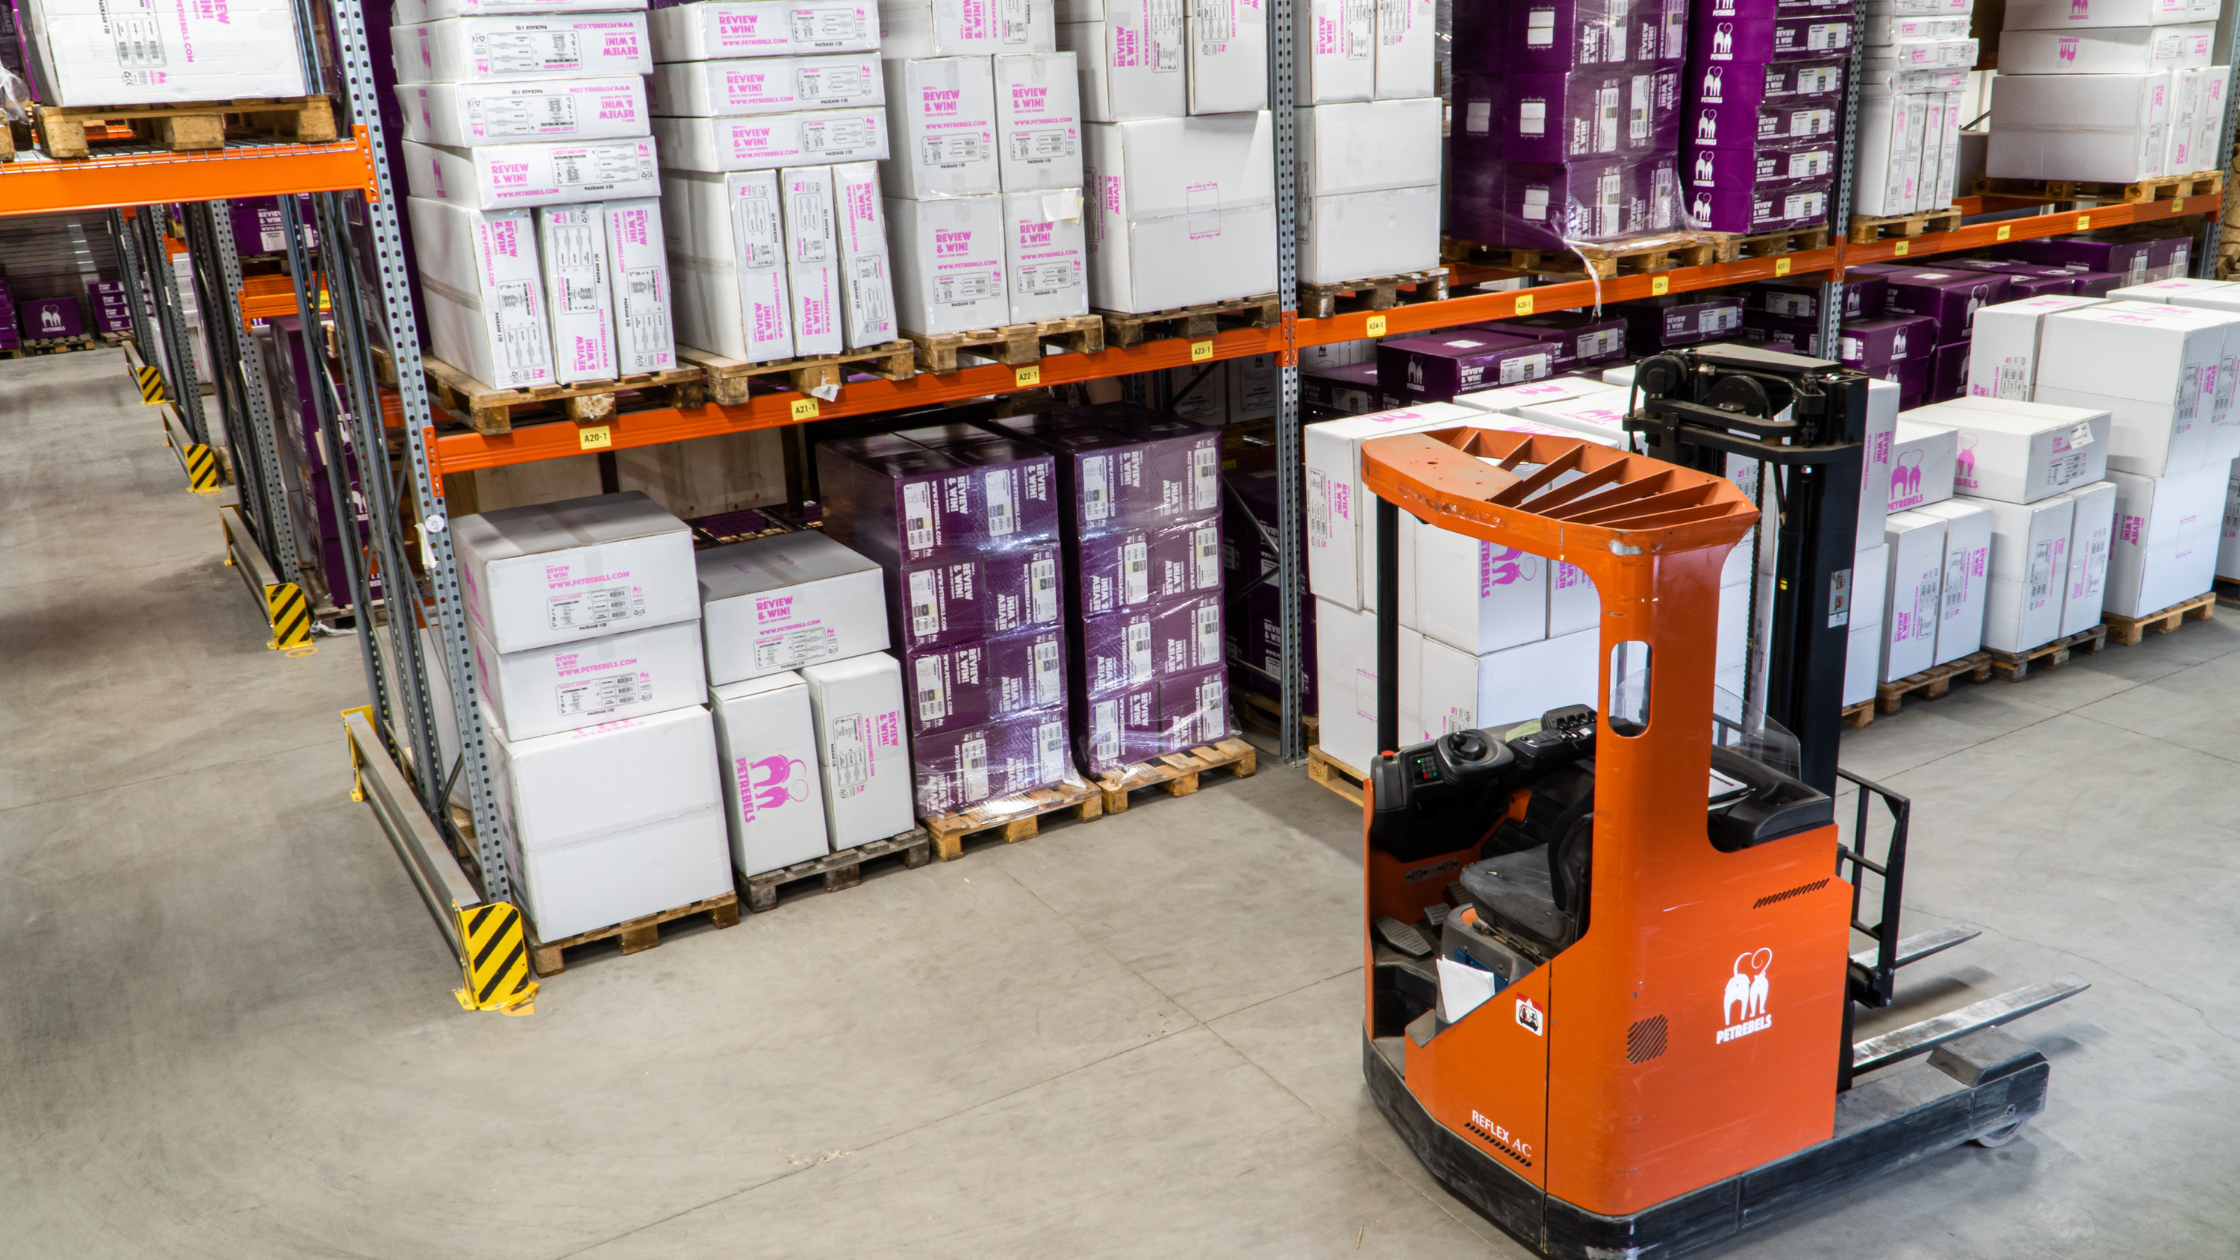 A forklift in a warehouse